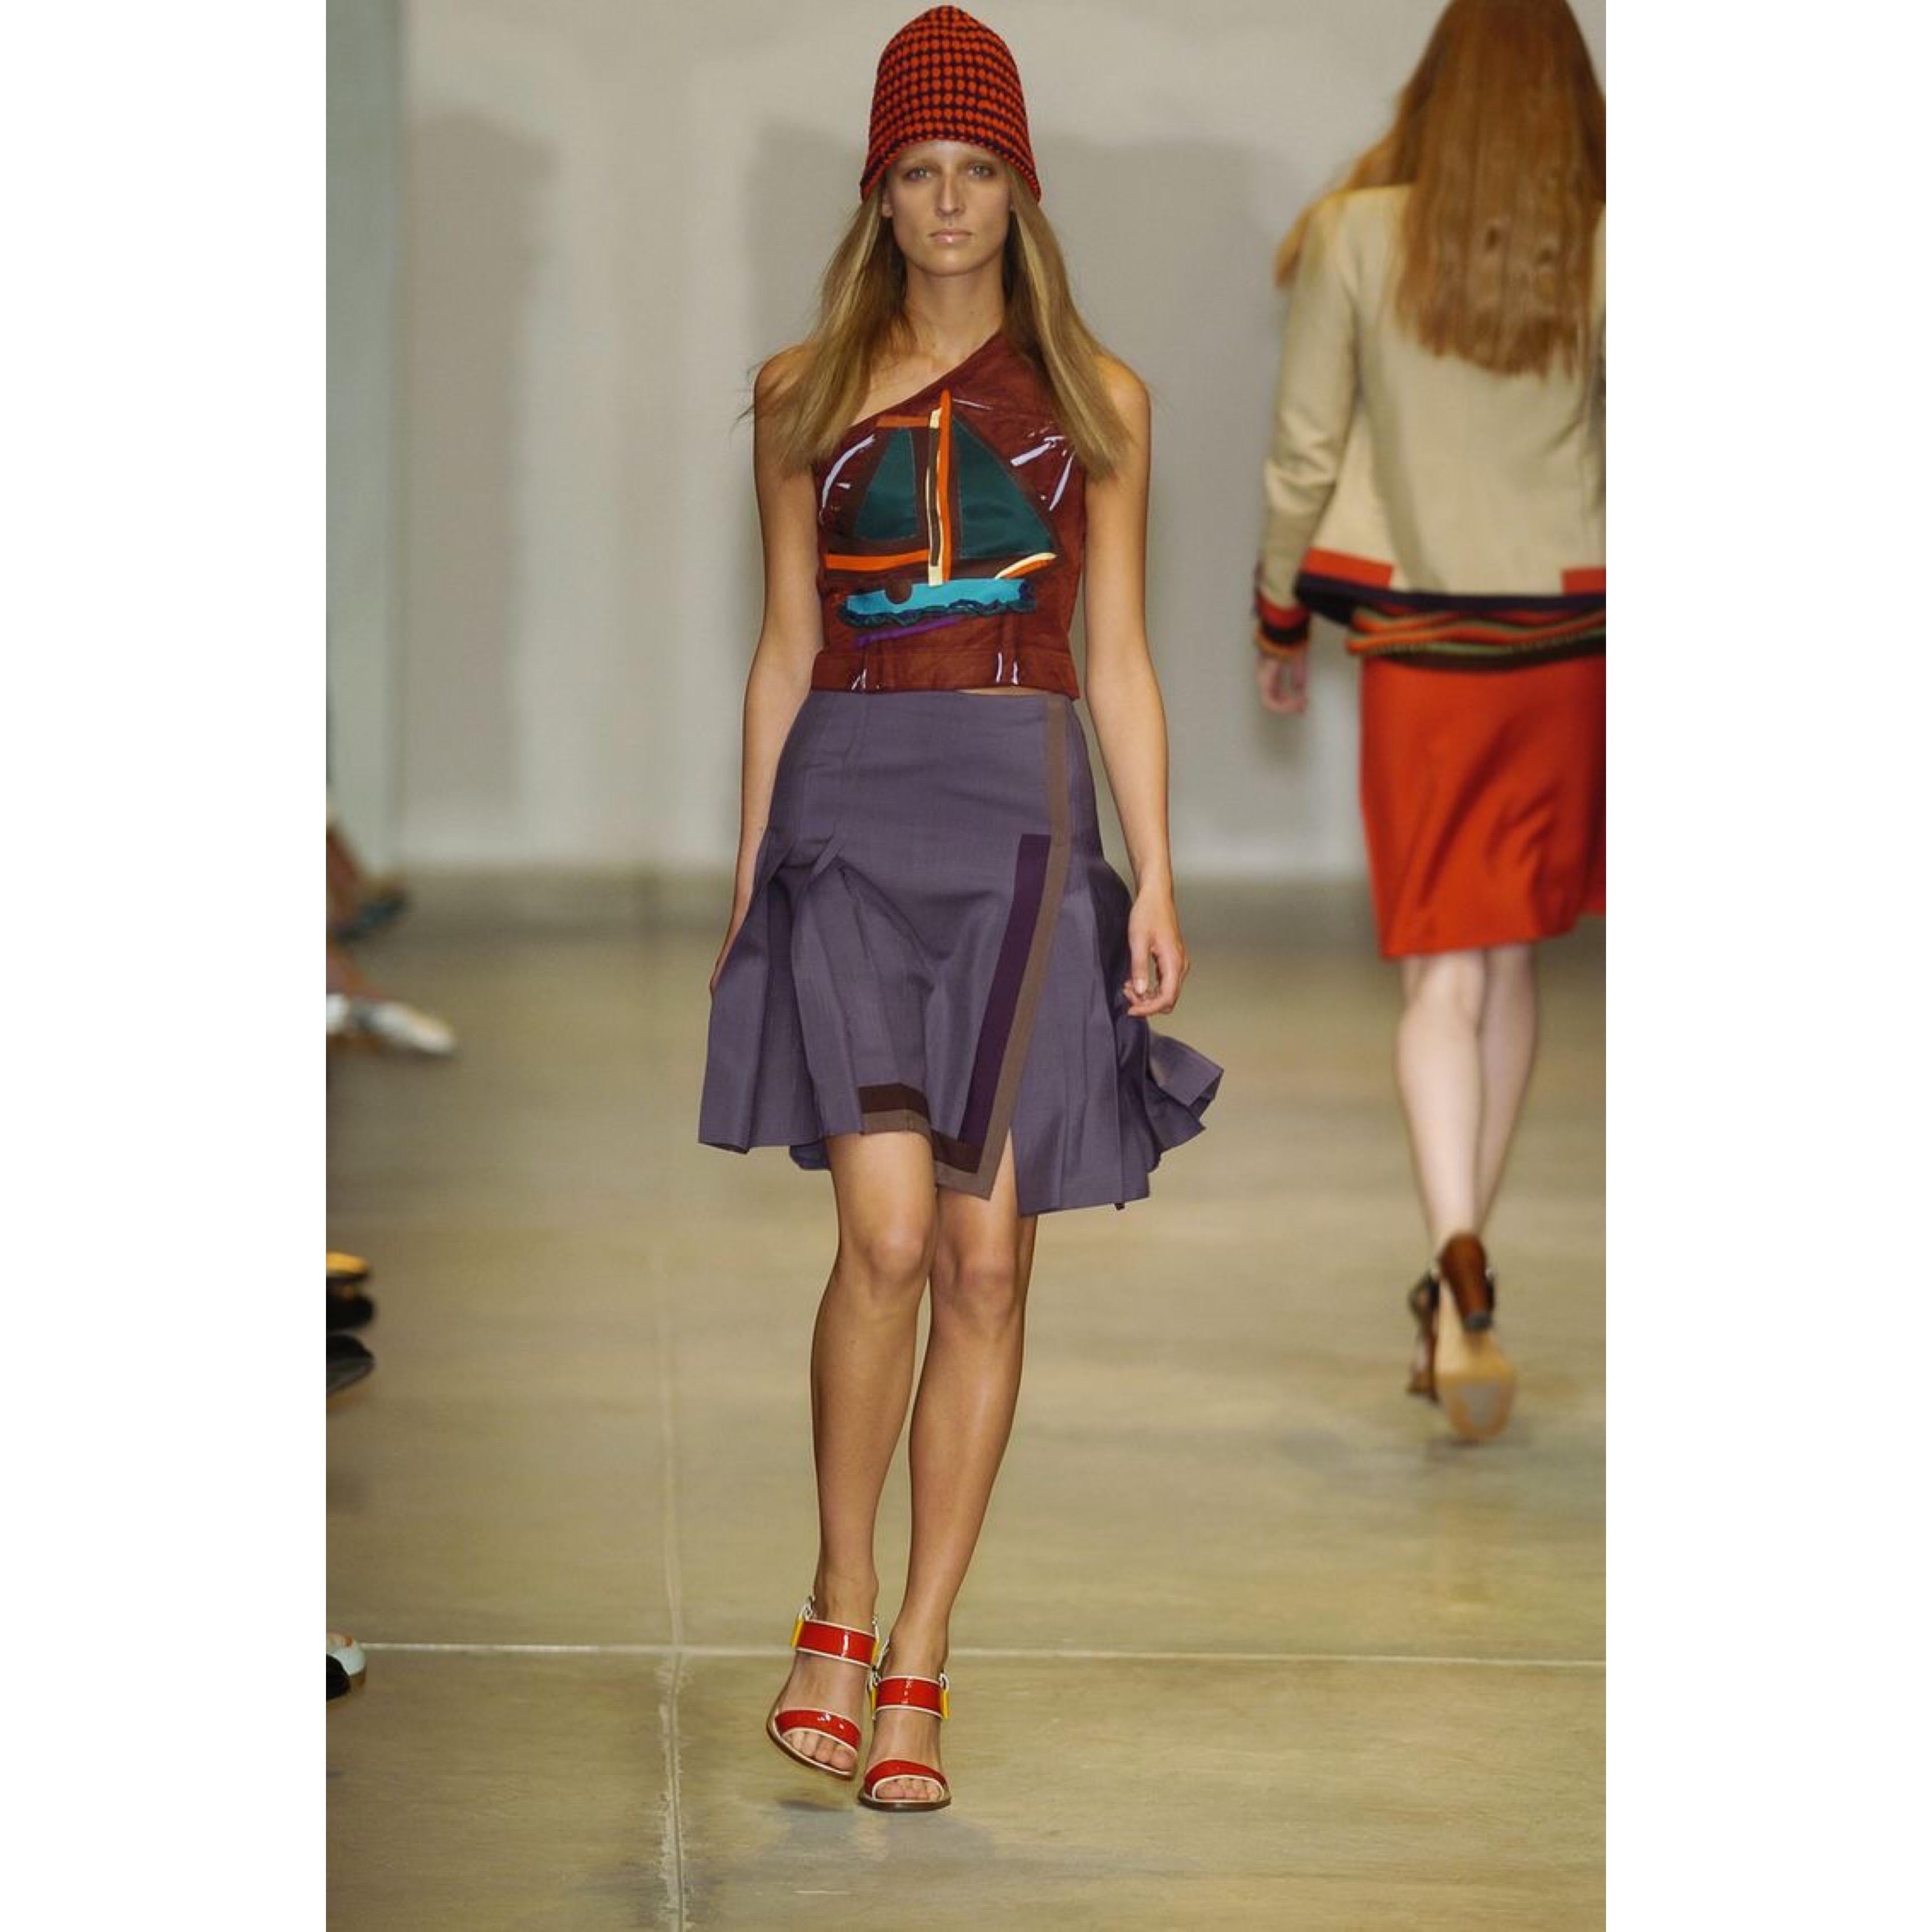 Inspired by the allure of the islands and a Caribbean charm, the Spring 2005 Prada collection showcased rich colors mixed with natural tones and textures. This top mixed with an arts-and-crafts aesthetic allowed for the collection to give off a more